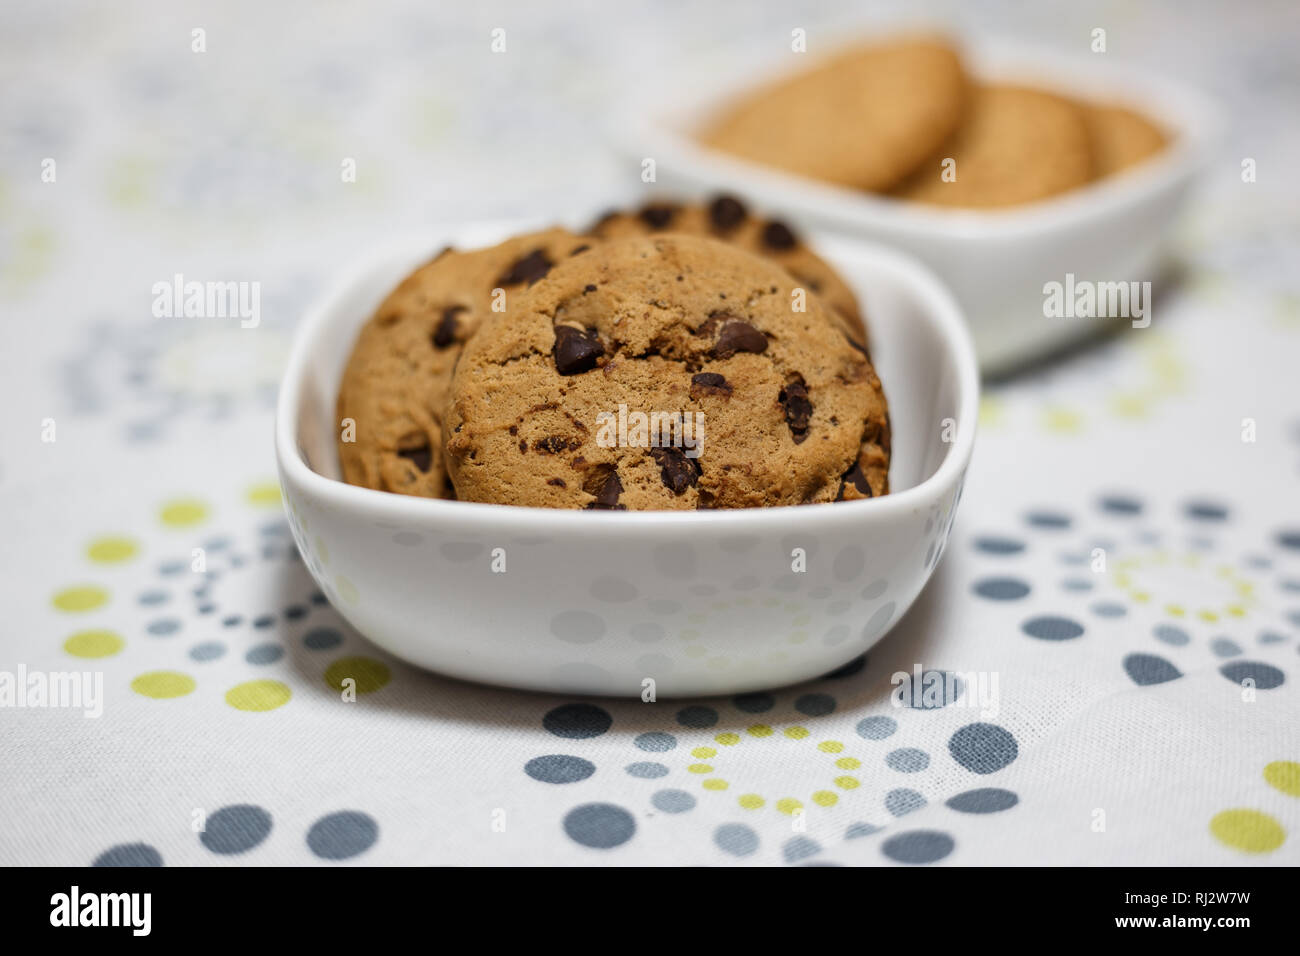 Close-up view of two different kind of cookies, oatmeal and chocolate chip cookies in the white bowls. Stock Photo